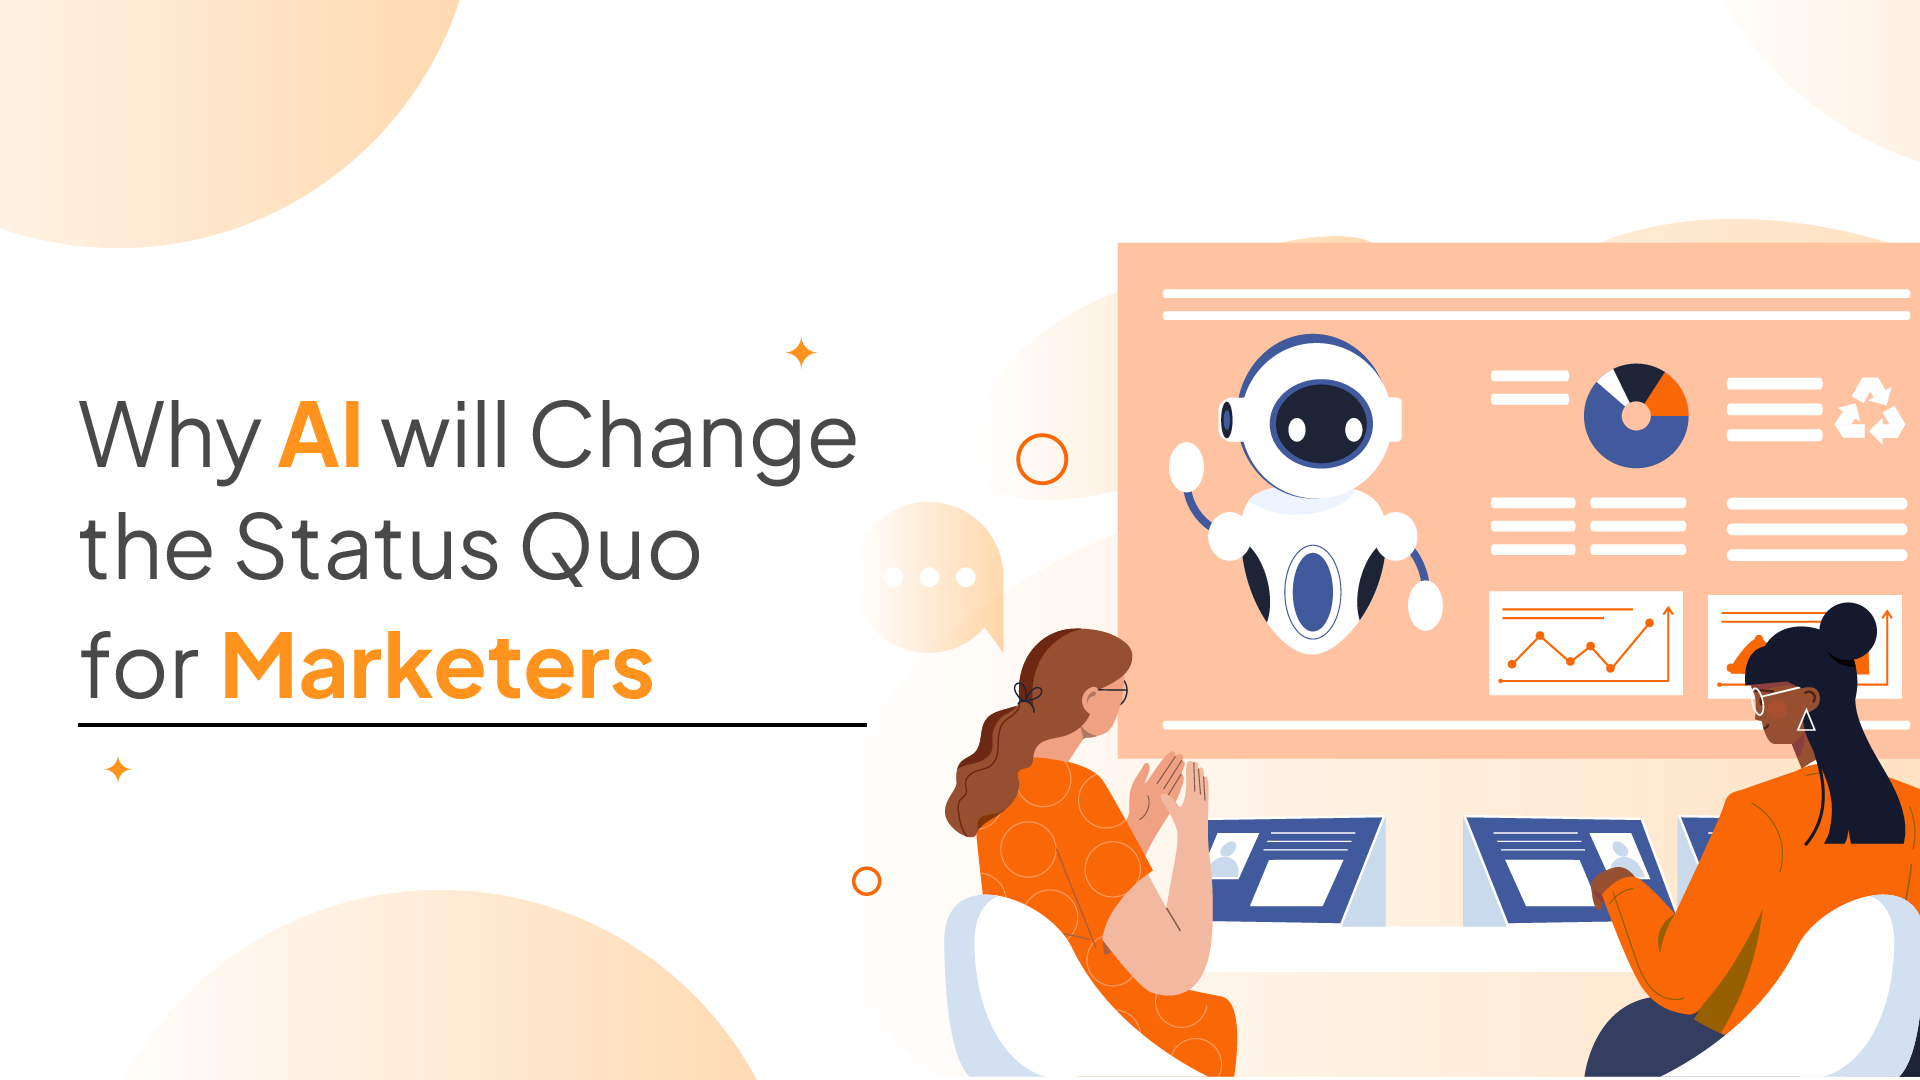 Why AI will Change the Status Quo for Marketers